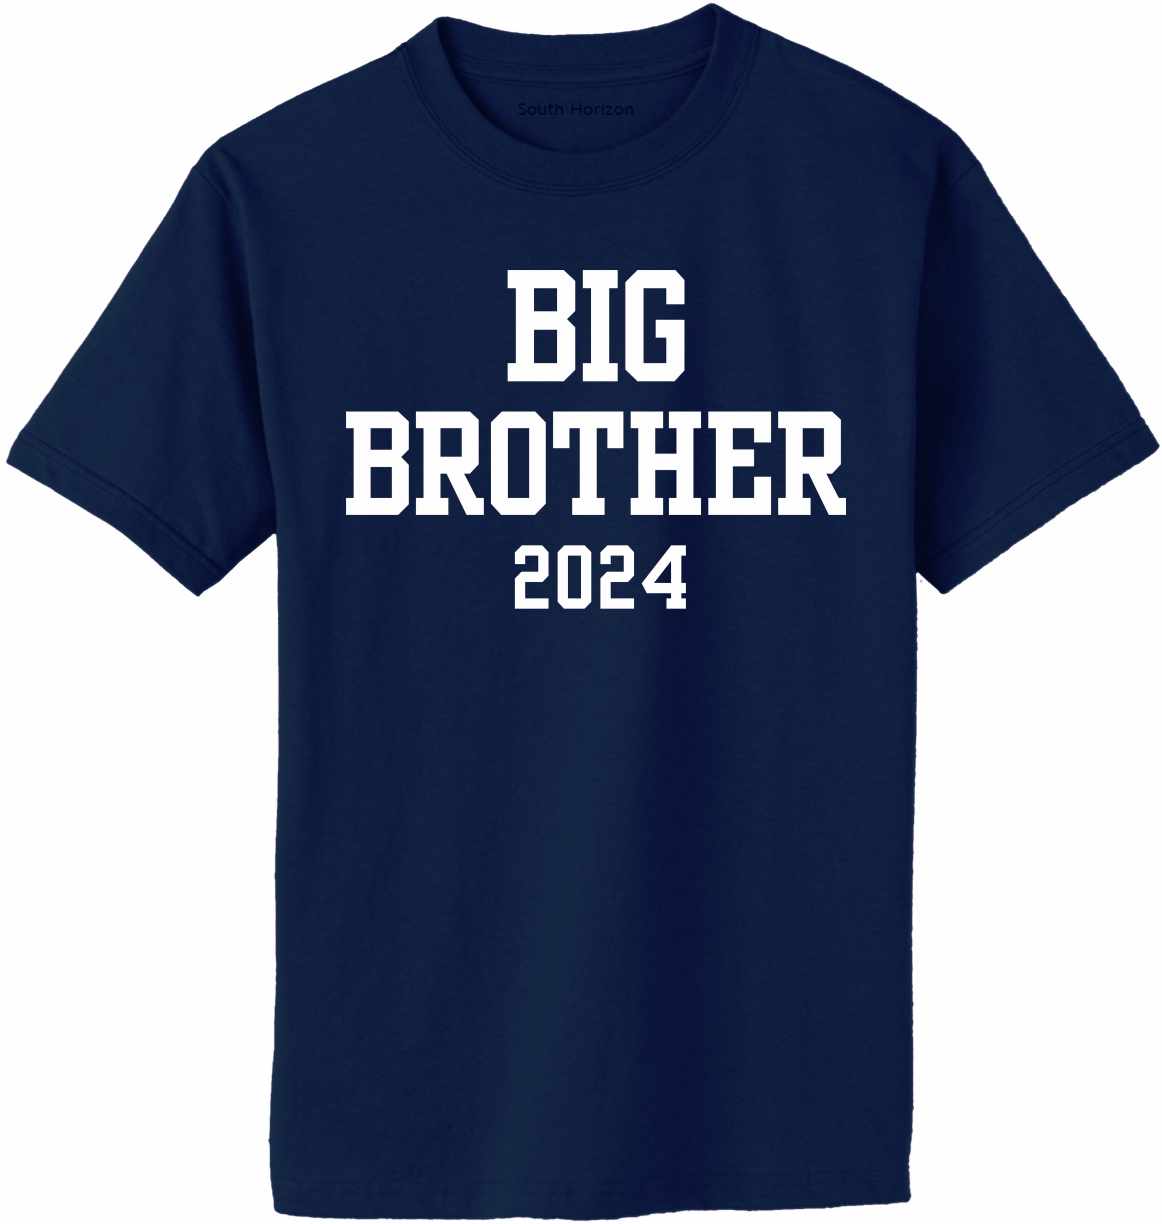 Big Brother 2024 on Adult T-Shirt (#1392-1)